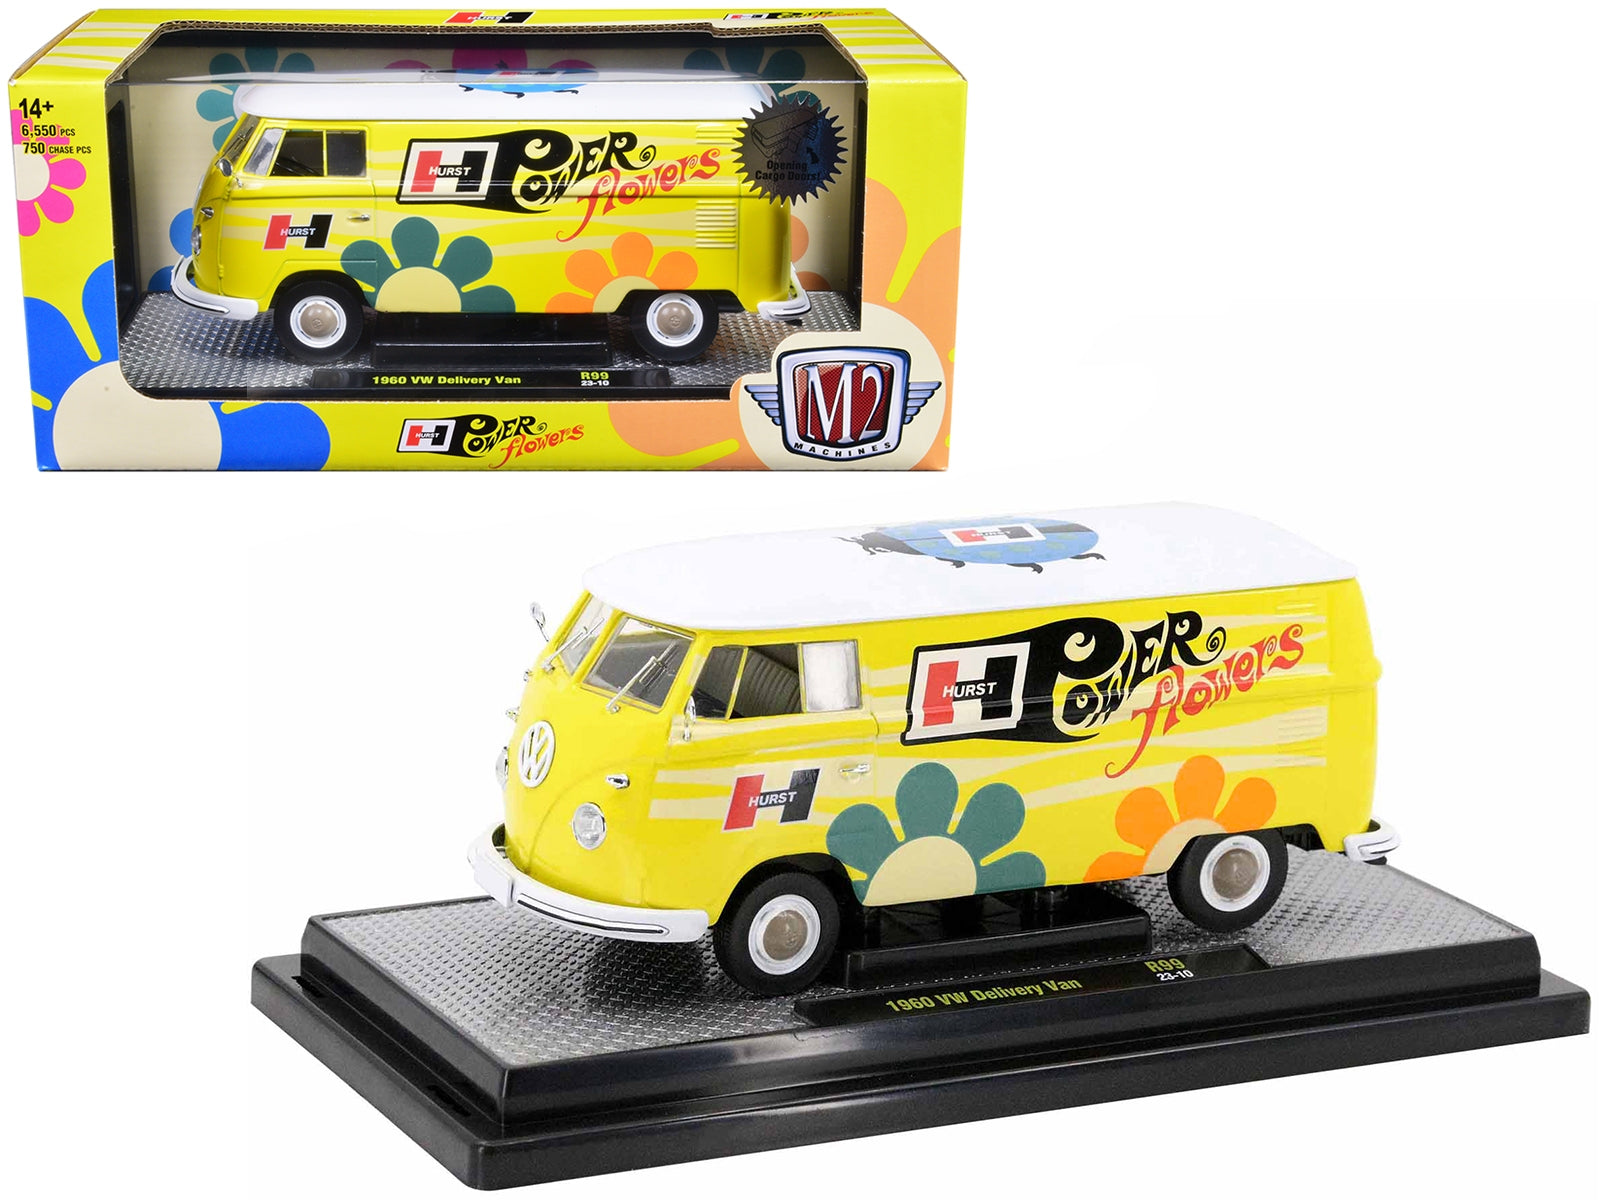 1960 Volkswagen Delivery Van Yellow with Bright White Top and Flower Graphics "Hurst Power Flowers" Limited Edition to 6550 pieces Worldwide 1/24 Diecast Model Car by M2 Machines